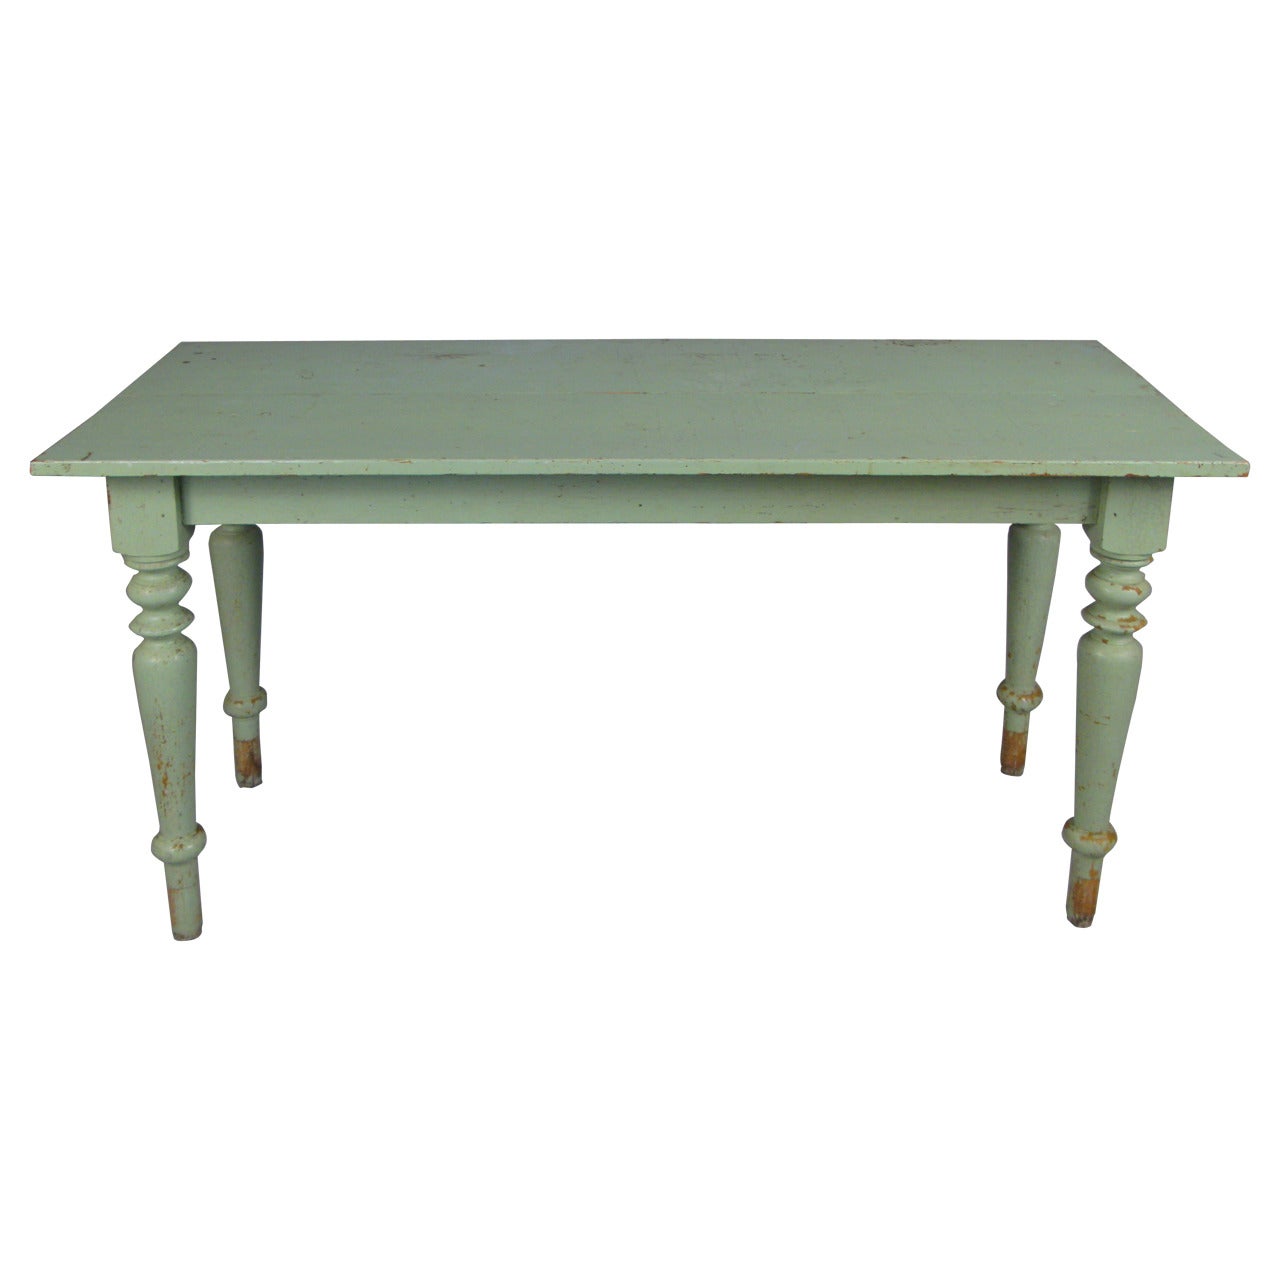 19th Century Country Table in Original Green Paint